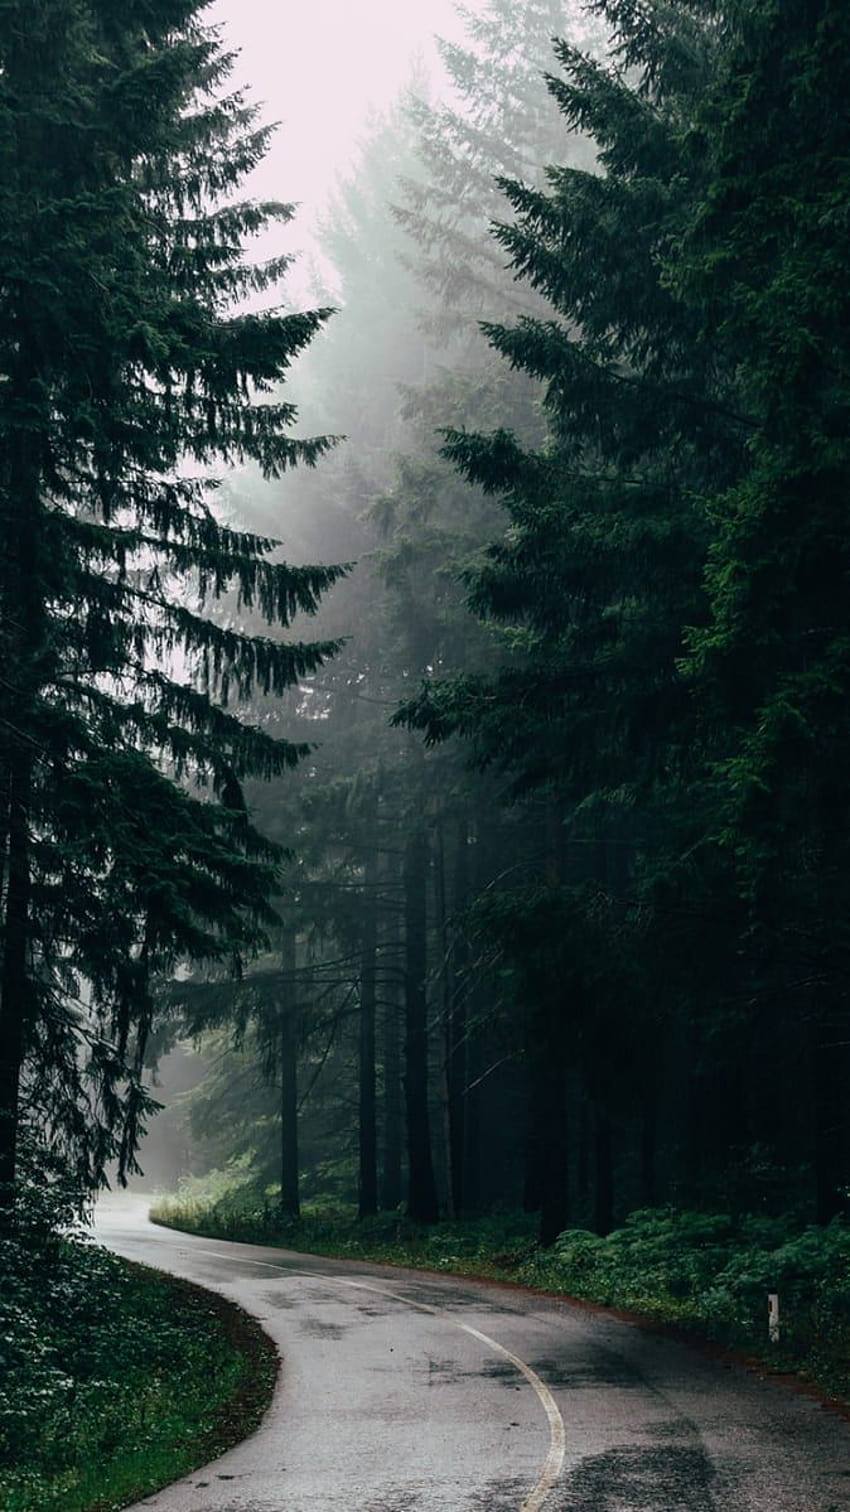 A foggy road surrounded by trees - Forest